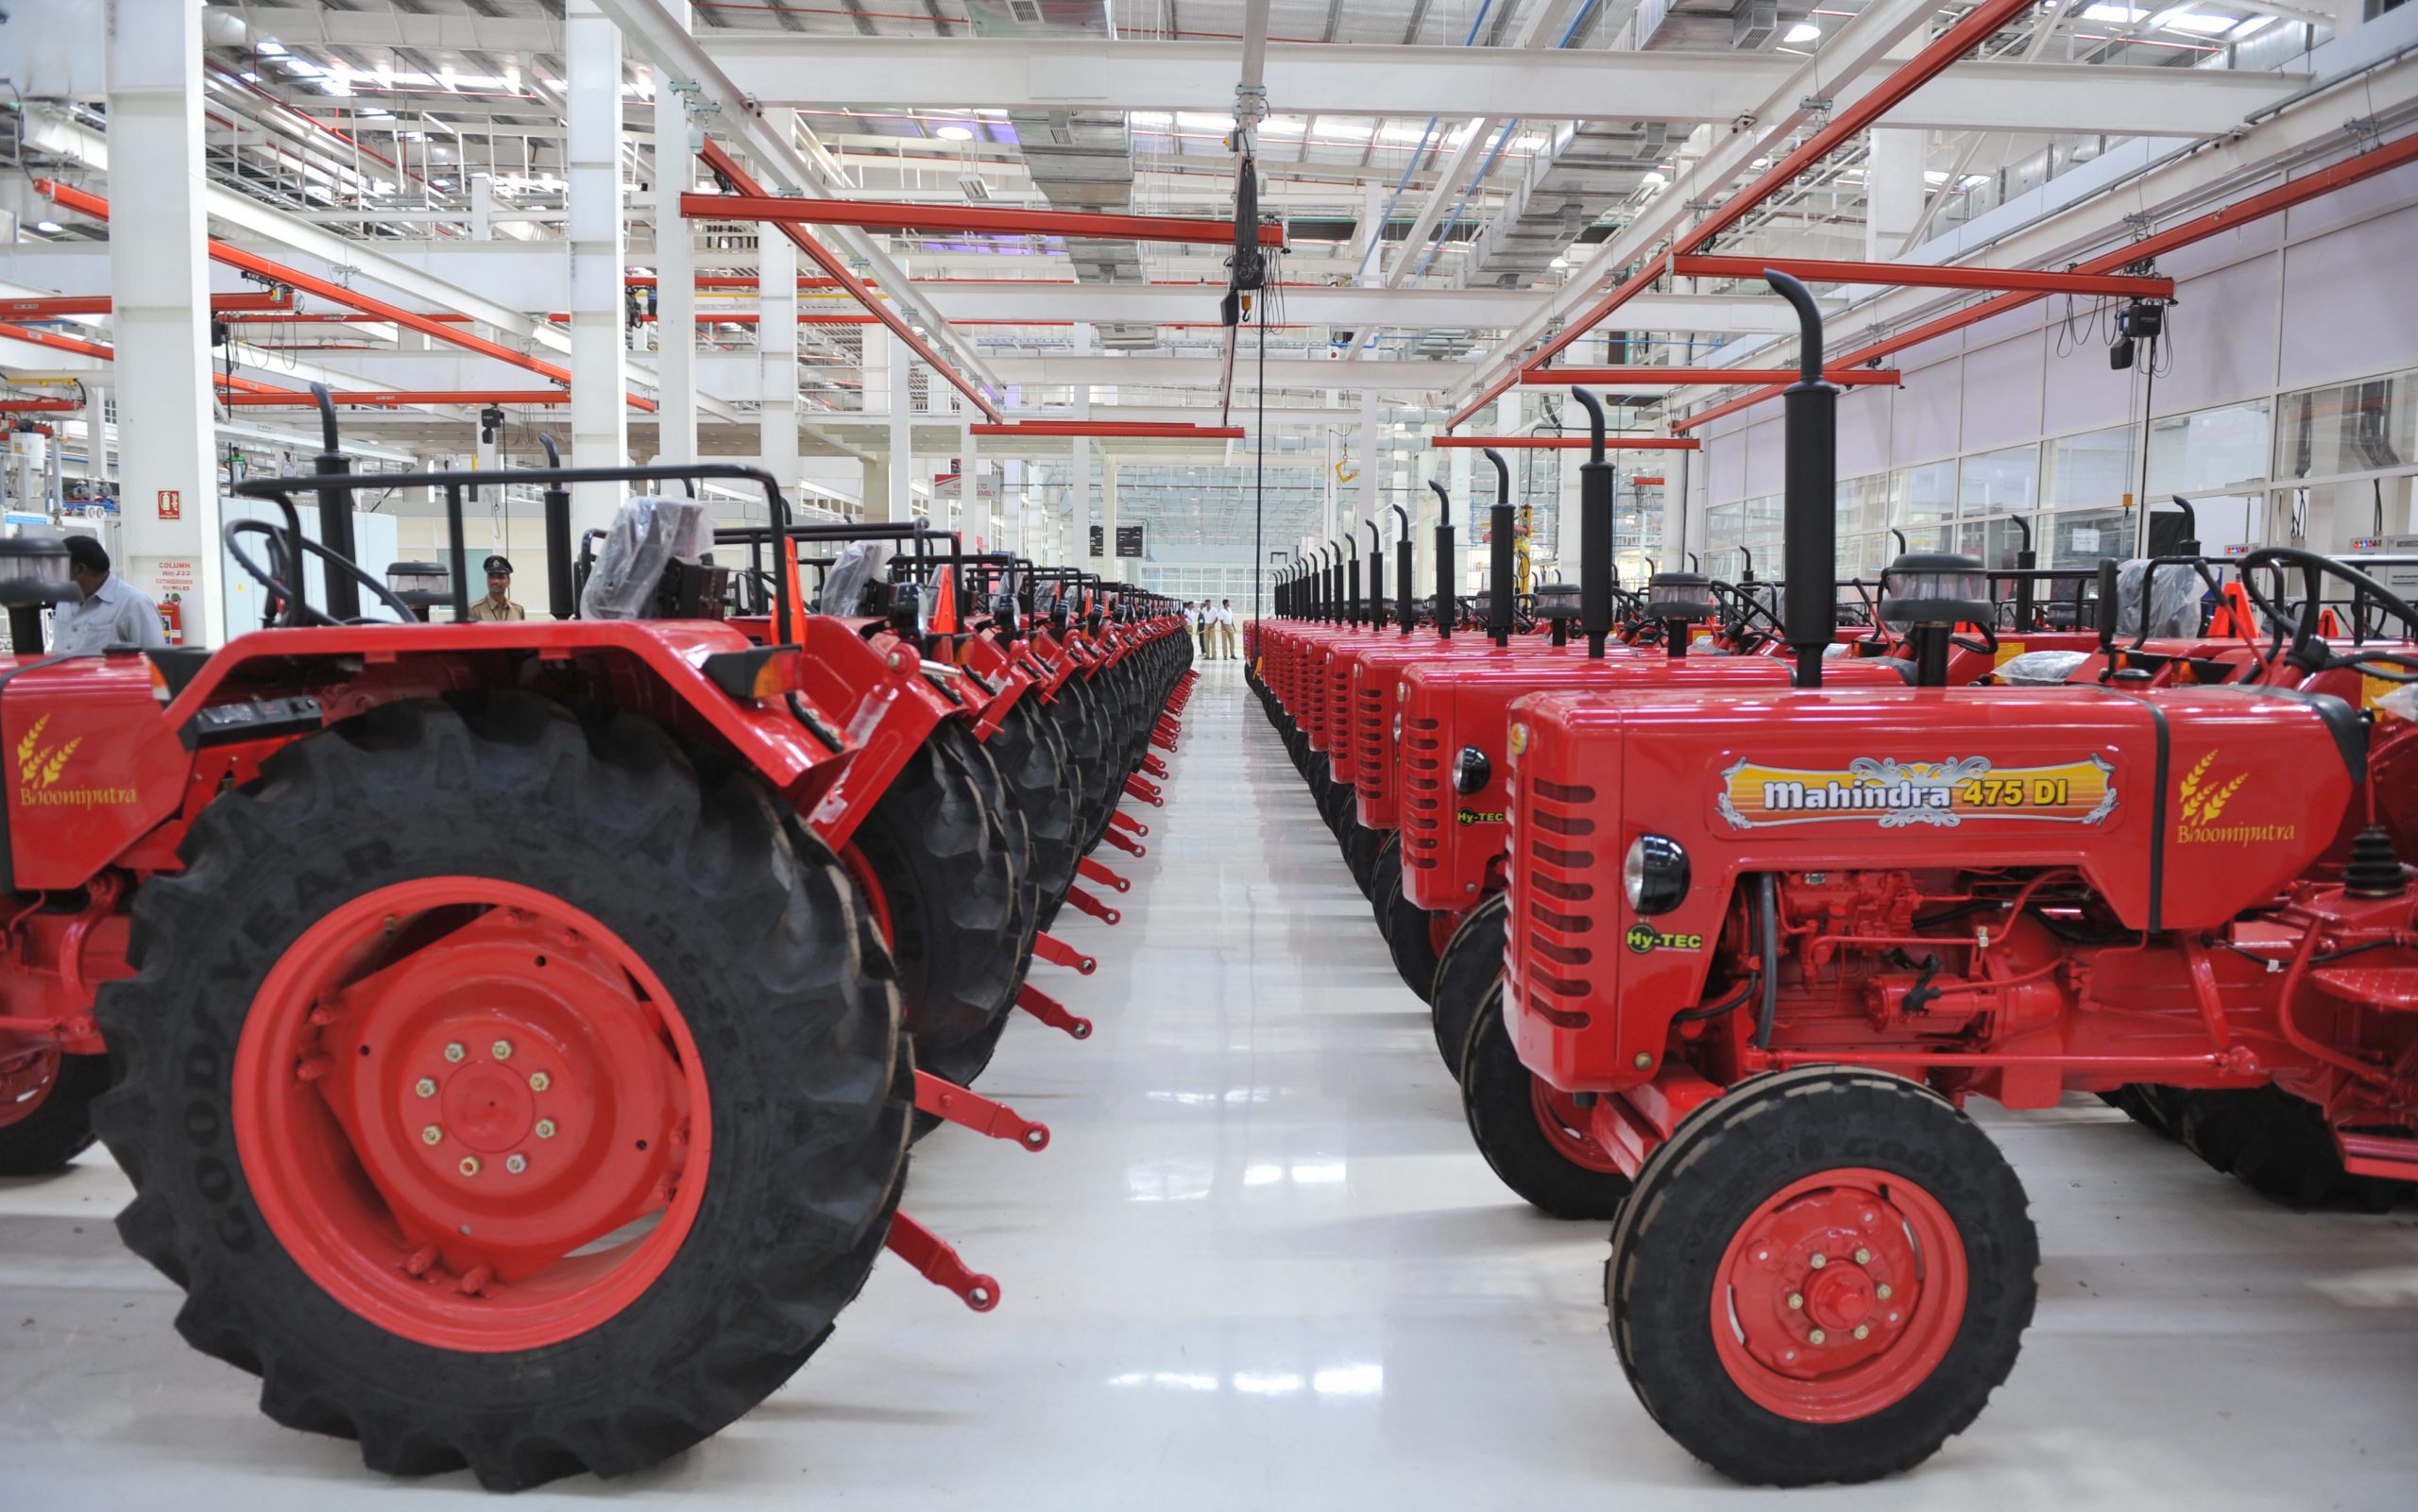 a line of Mahindra Tractors in a manufacturing facility